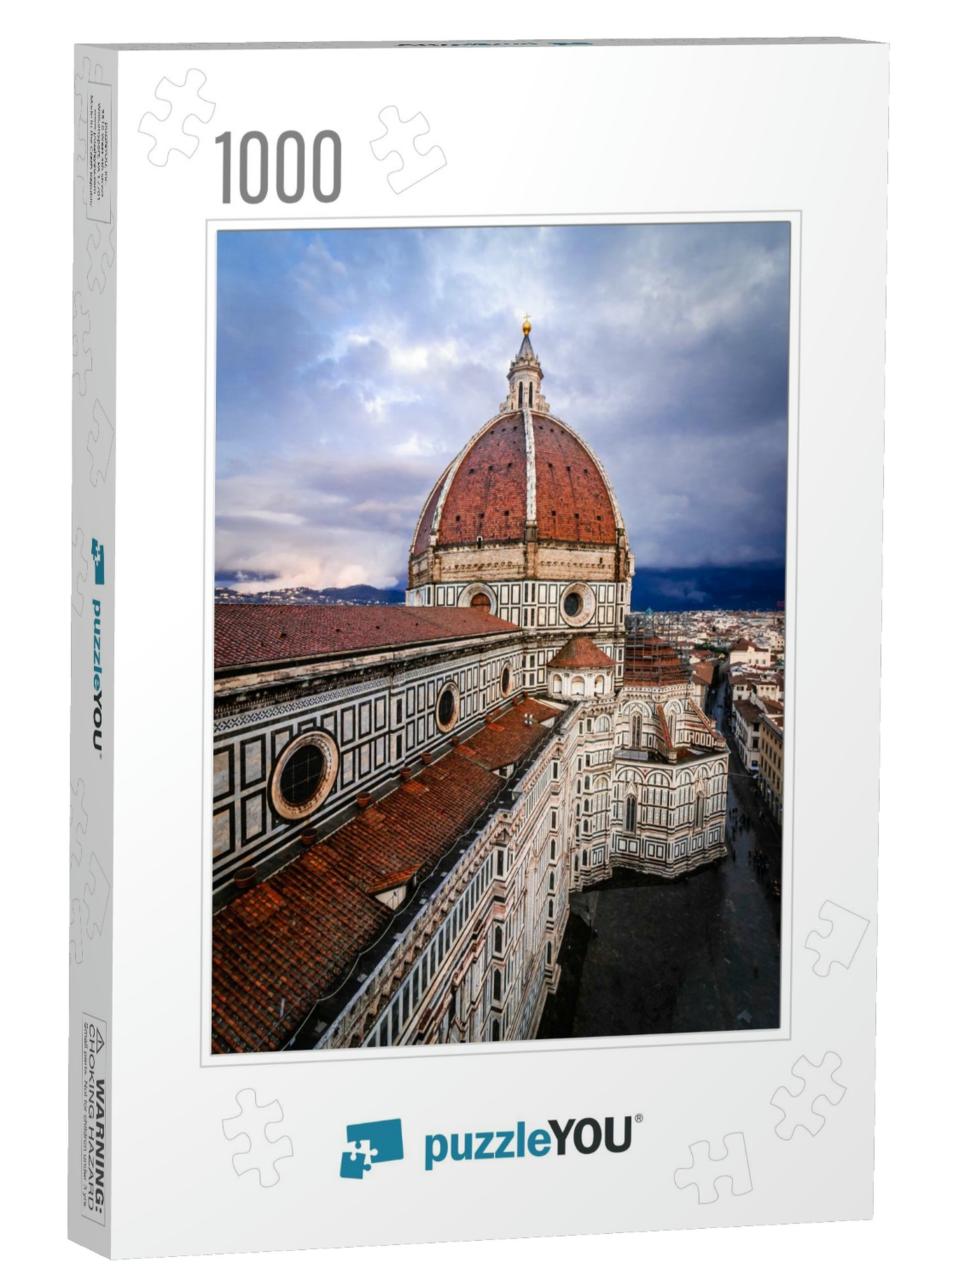 Picture of Florence Duomo Santa Maria Del Fiore, Italy... Jigsaw Puzzle with 1000 pieces